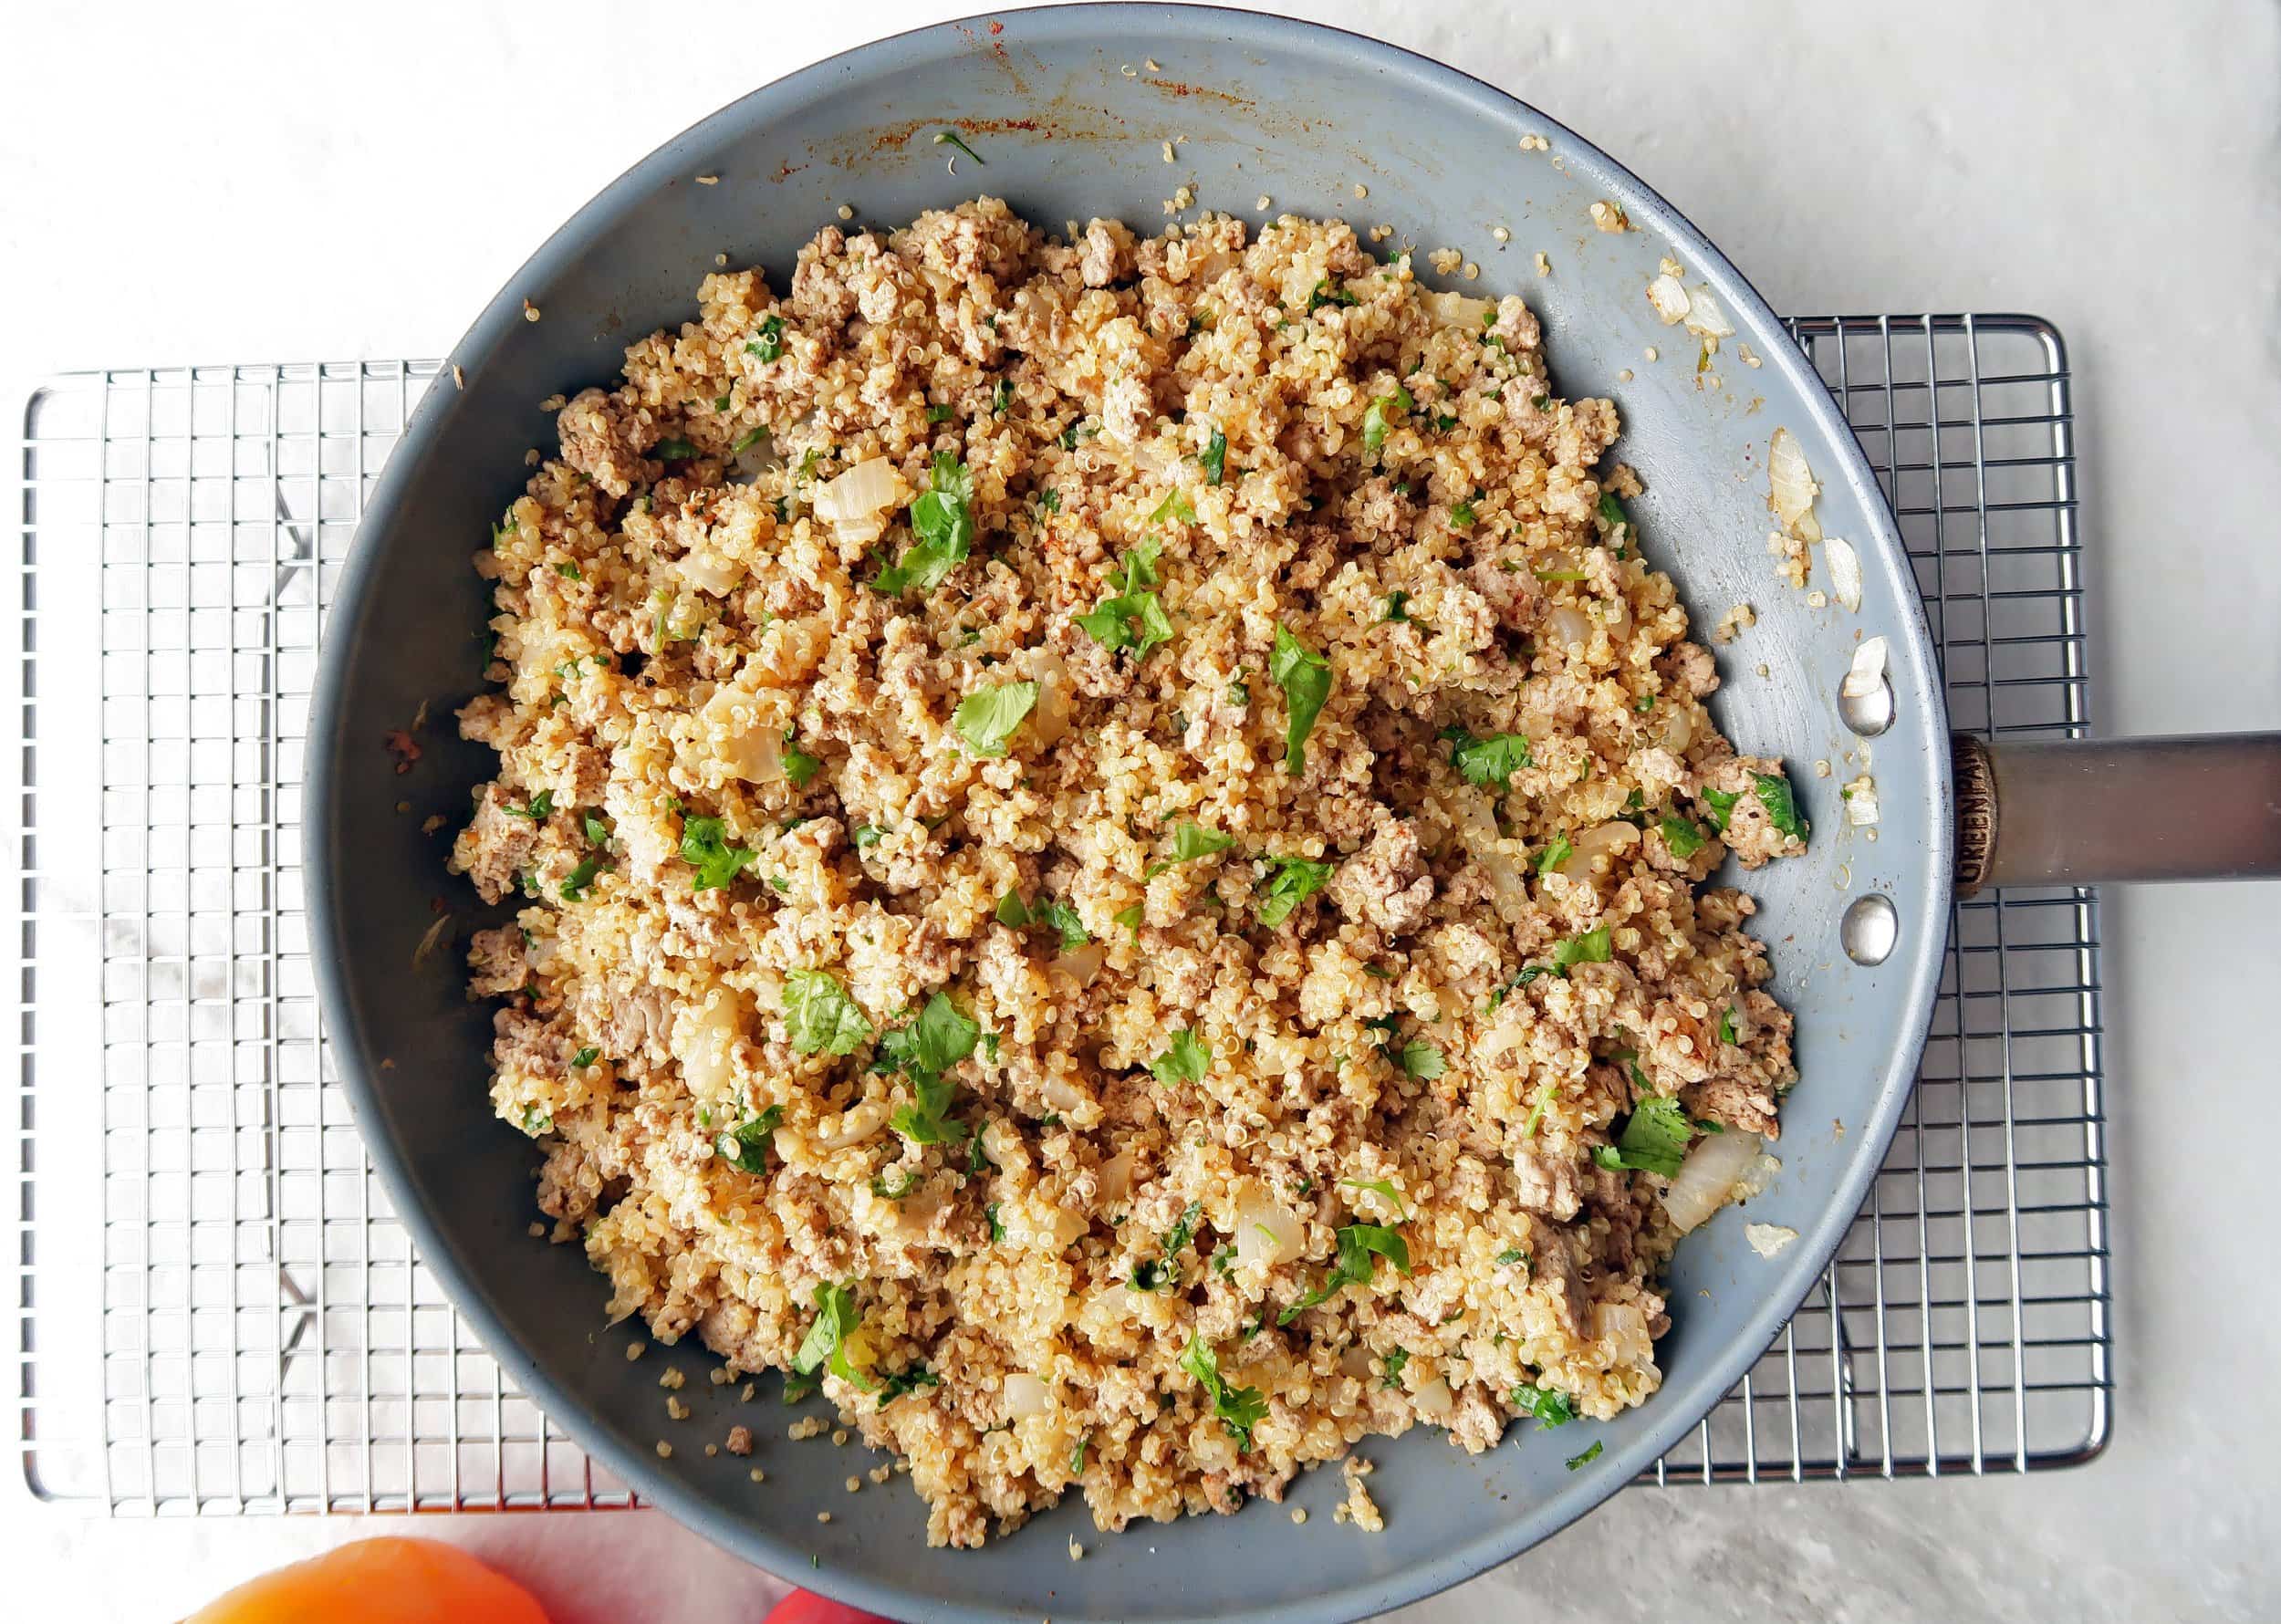 Freshly cooked ground turkey in a frying pan with quinoa and cilantro.